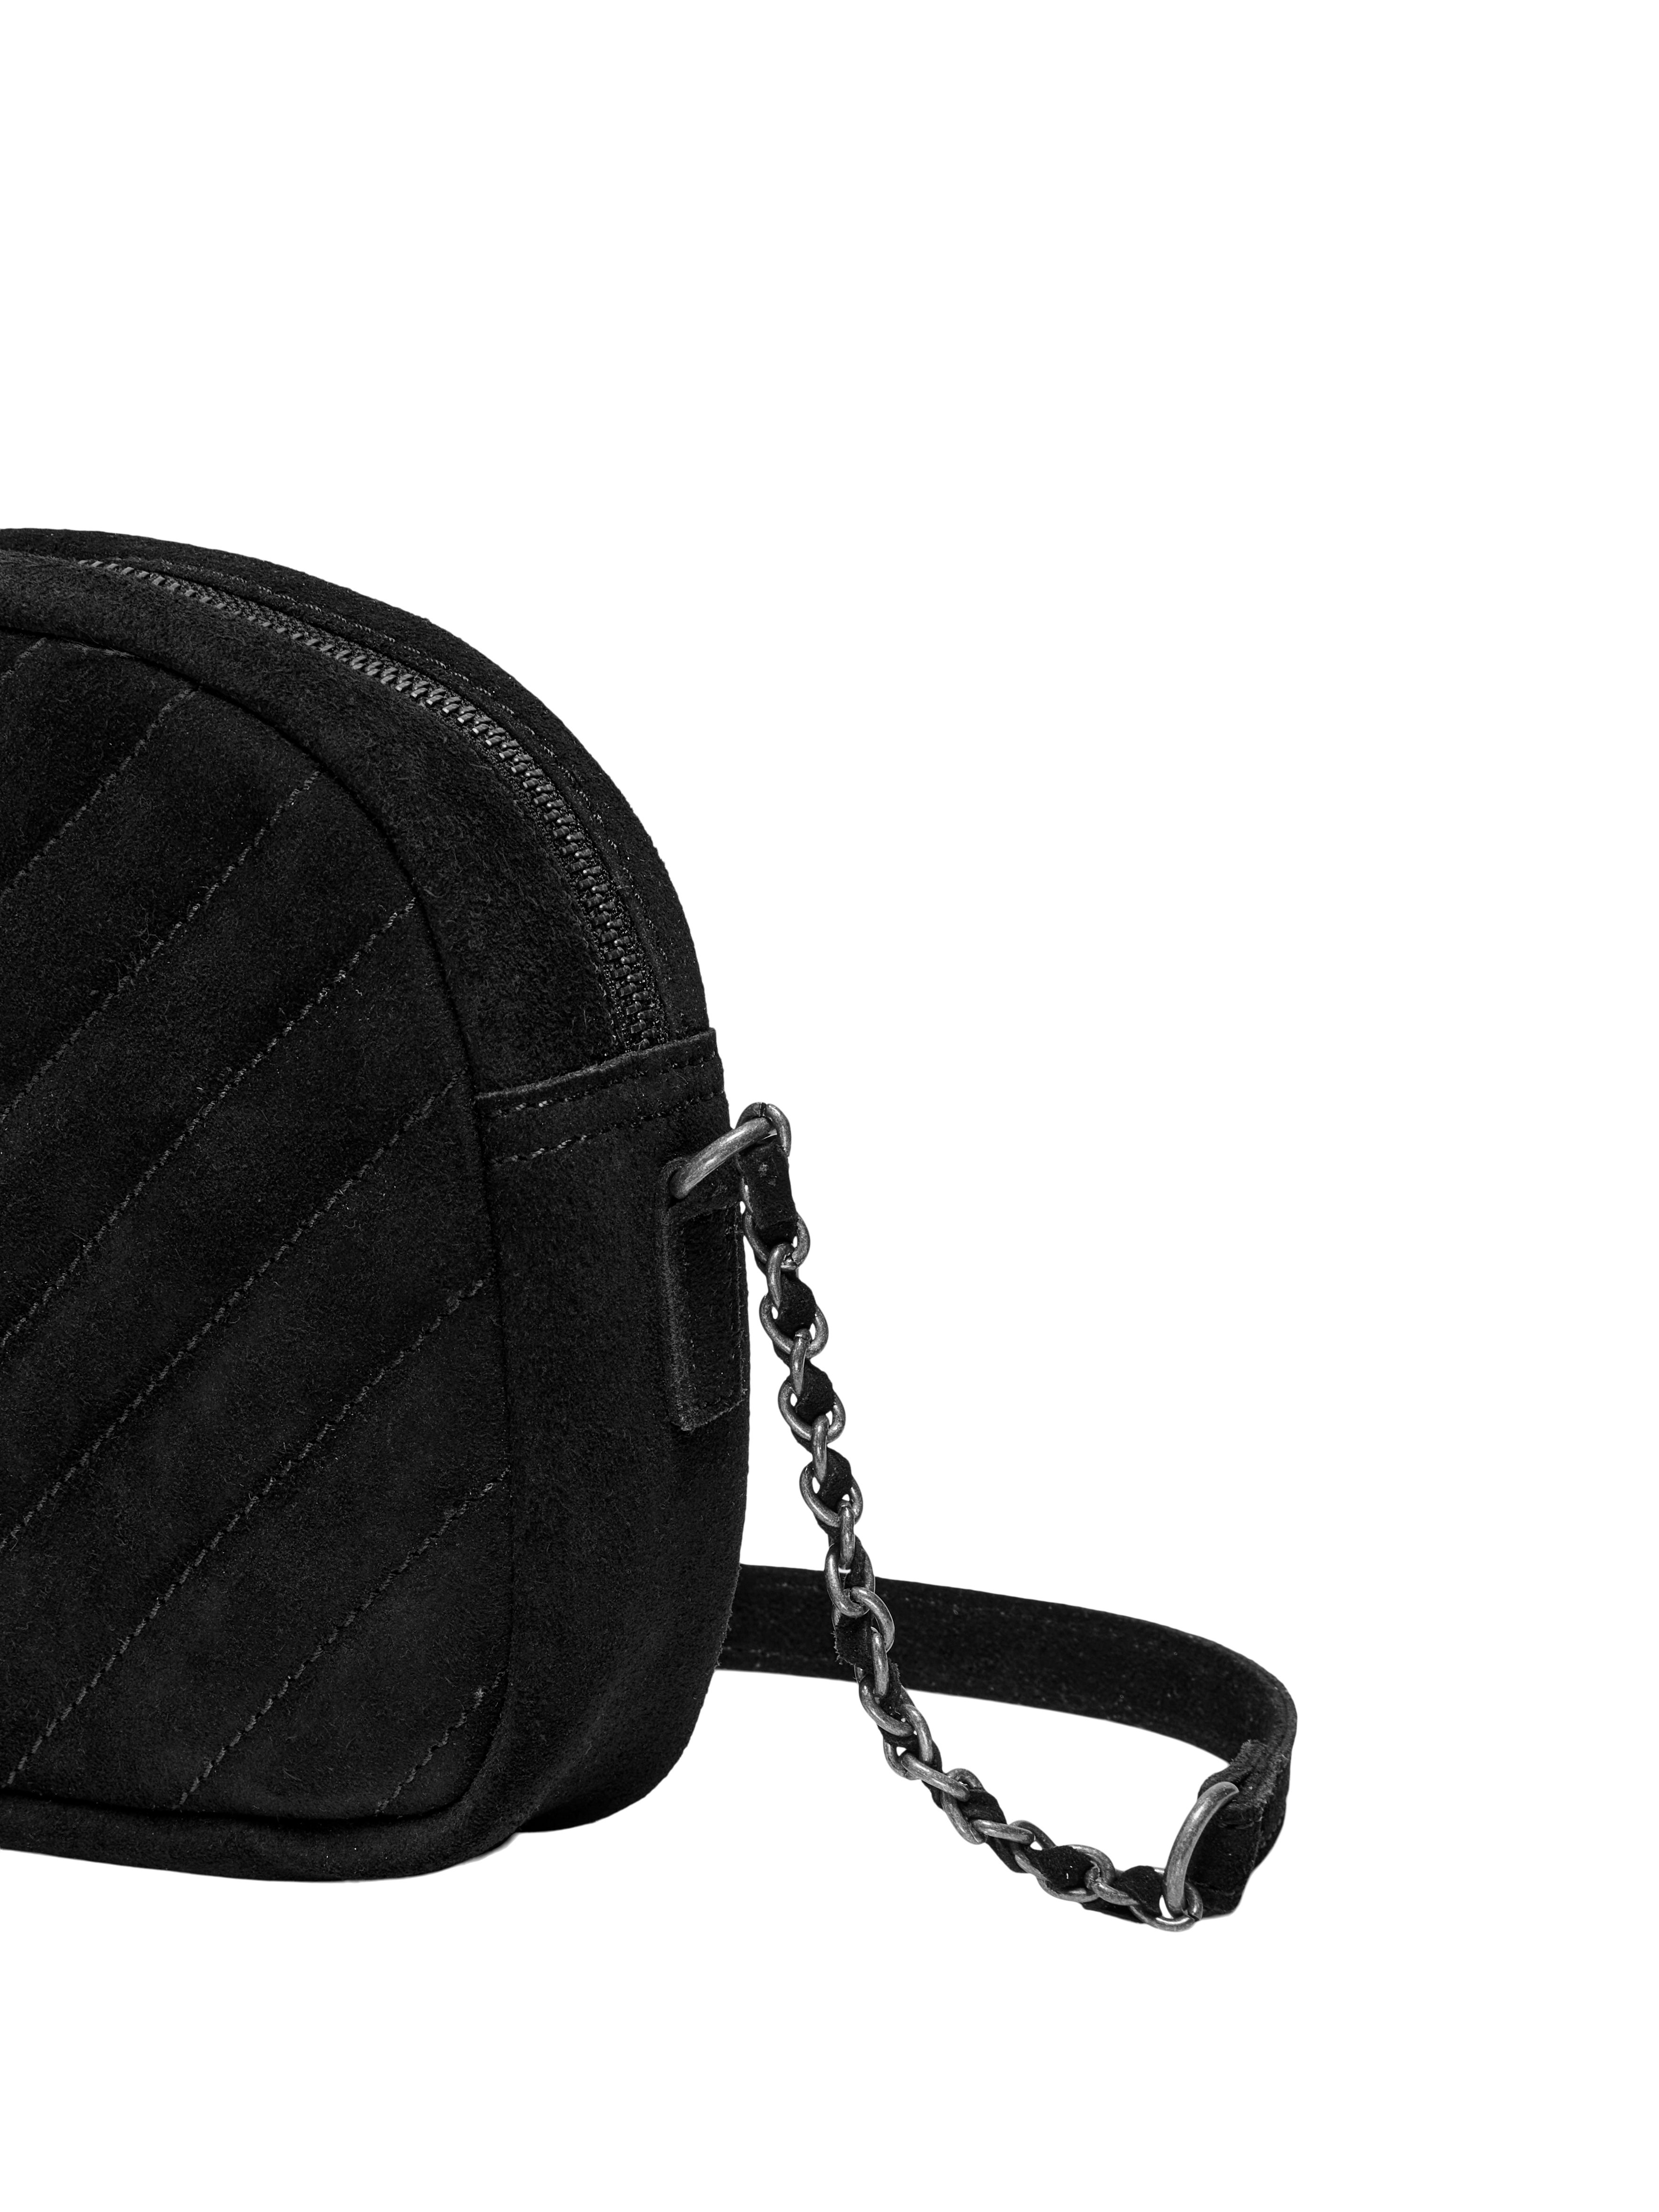 Buy Peacocktion Small Quilted Crossbody Bags for Women, Shouler Handbags  RFID Cell Phone Wallet Purse Clutch with Tassel, A - Black With Tassel,  Small at Amazon.in